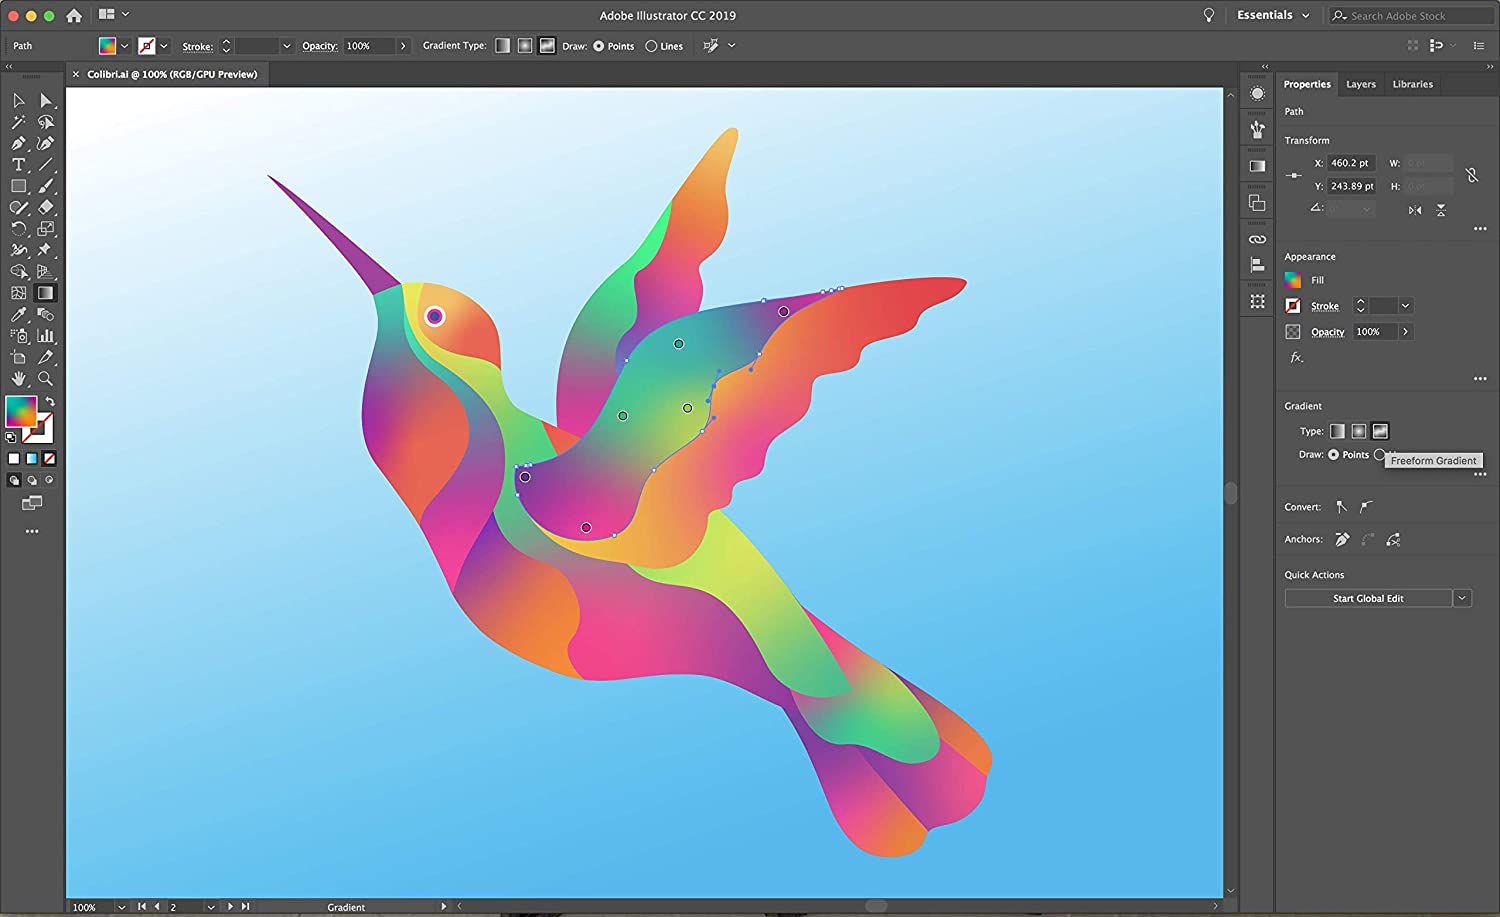 vector based graphics software for mac